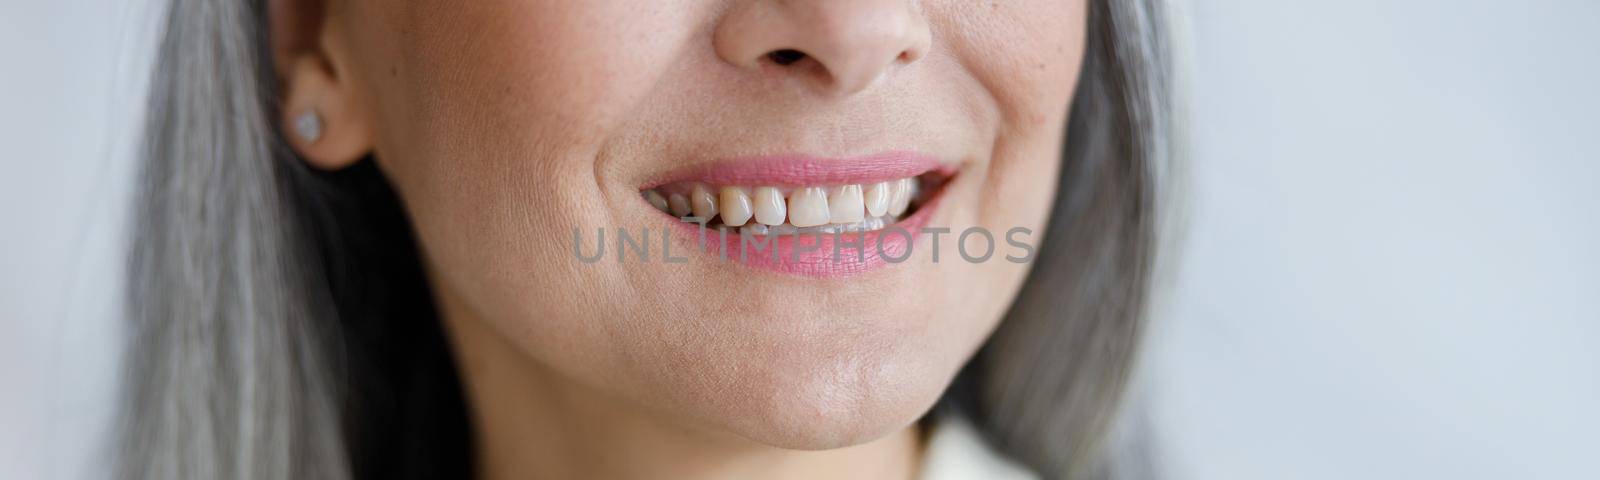 Positive mature lady in beige shirt smiles to camera showing healthy teath on light background in studio closeup